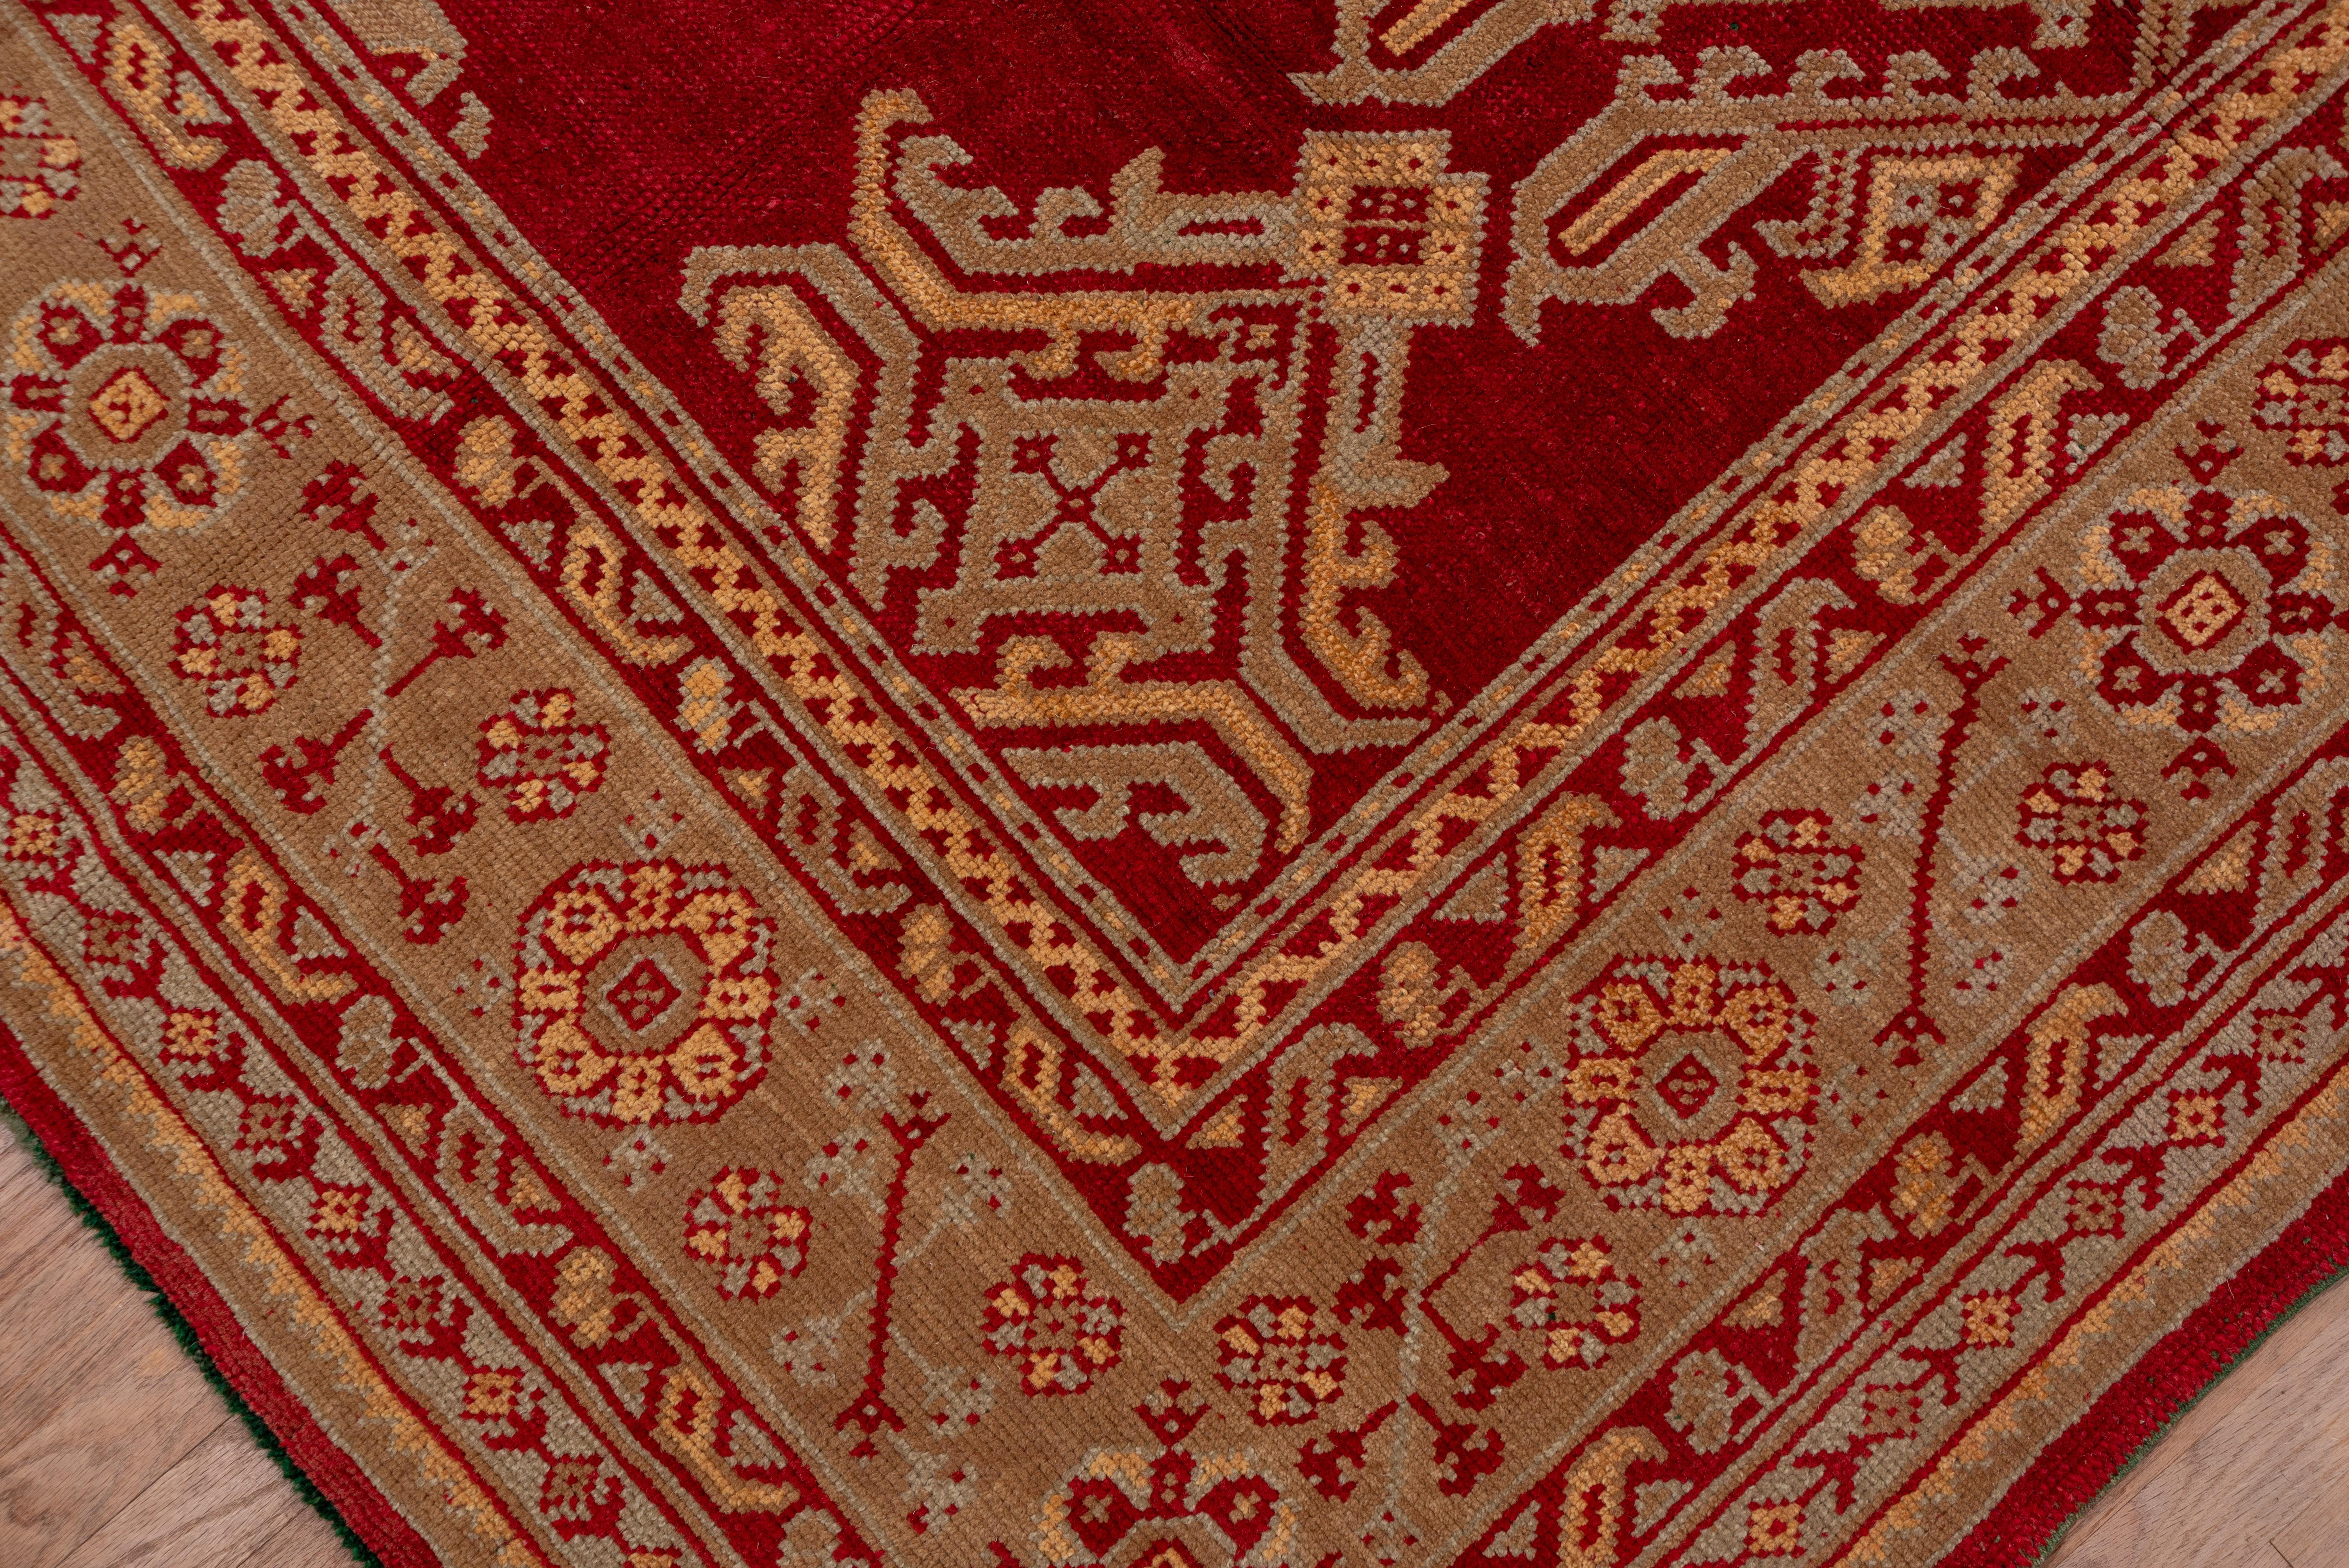 Antique Turkish Oushak Square Wool Rug, Red Allover Field, Circa 1920s In Good Condition For Sale In New York, NY